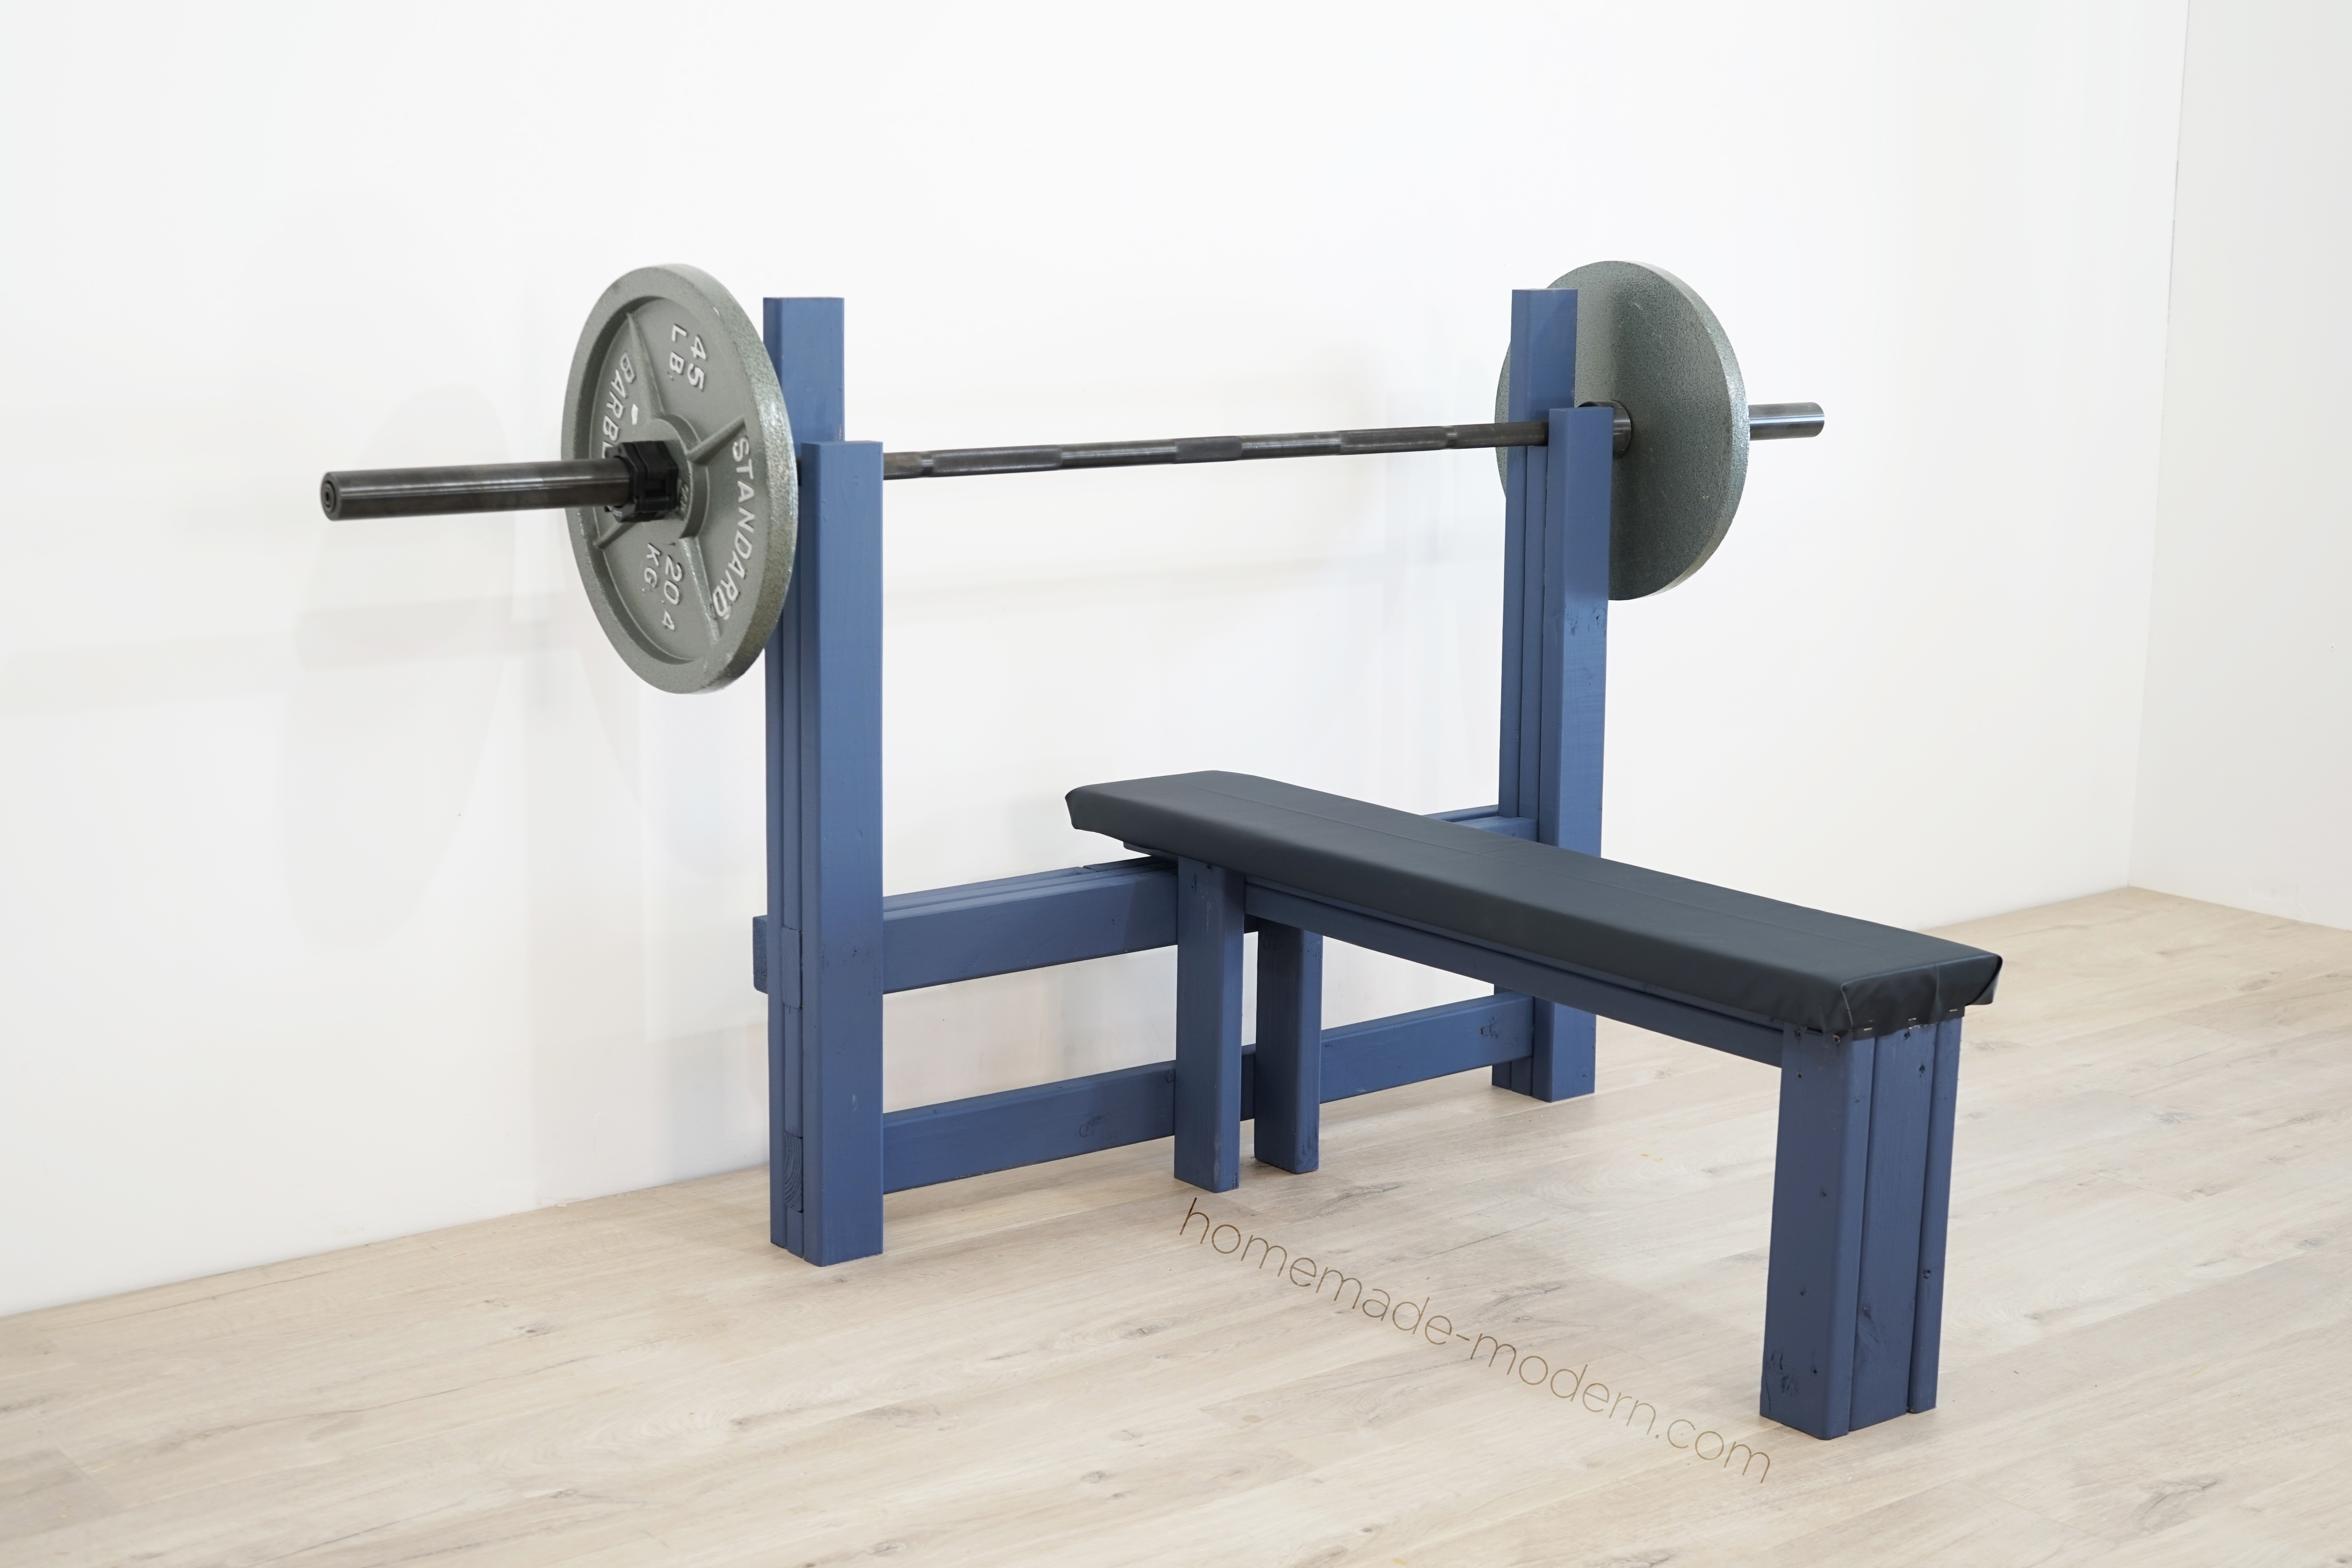 This DIY weight bench is made out  of 2x4s, some ¾” plywood, and some foam and fabric and is  designed for bench pressing. For more information go to HomeMade-Modern.com